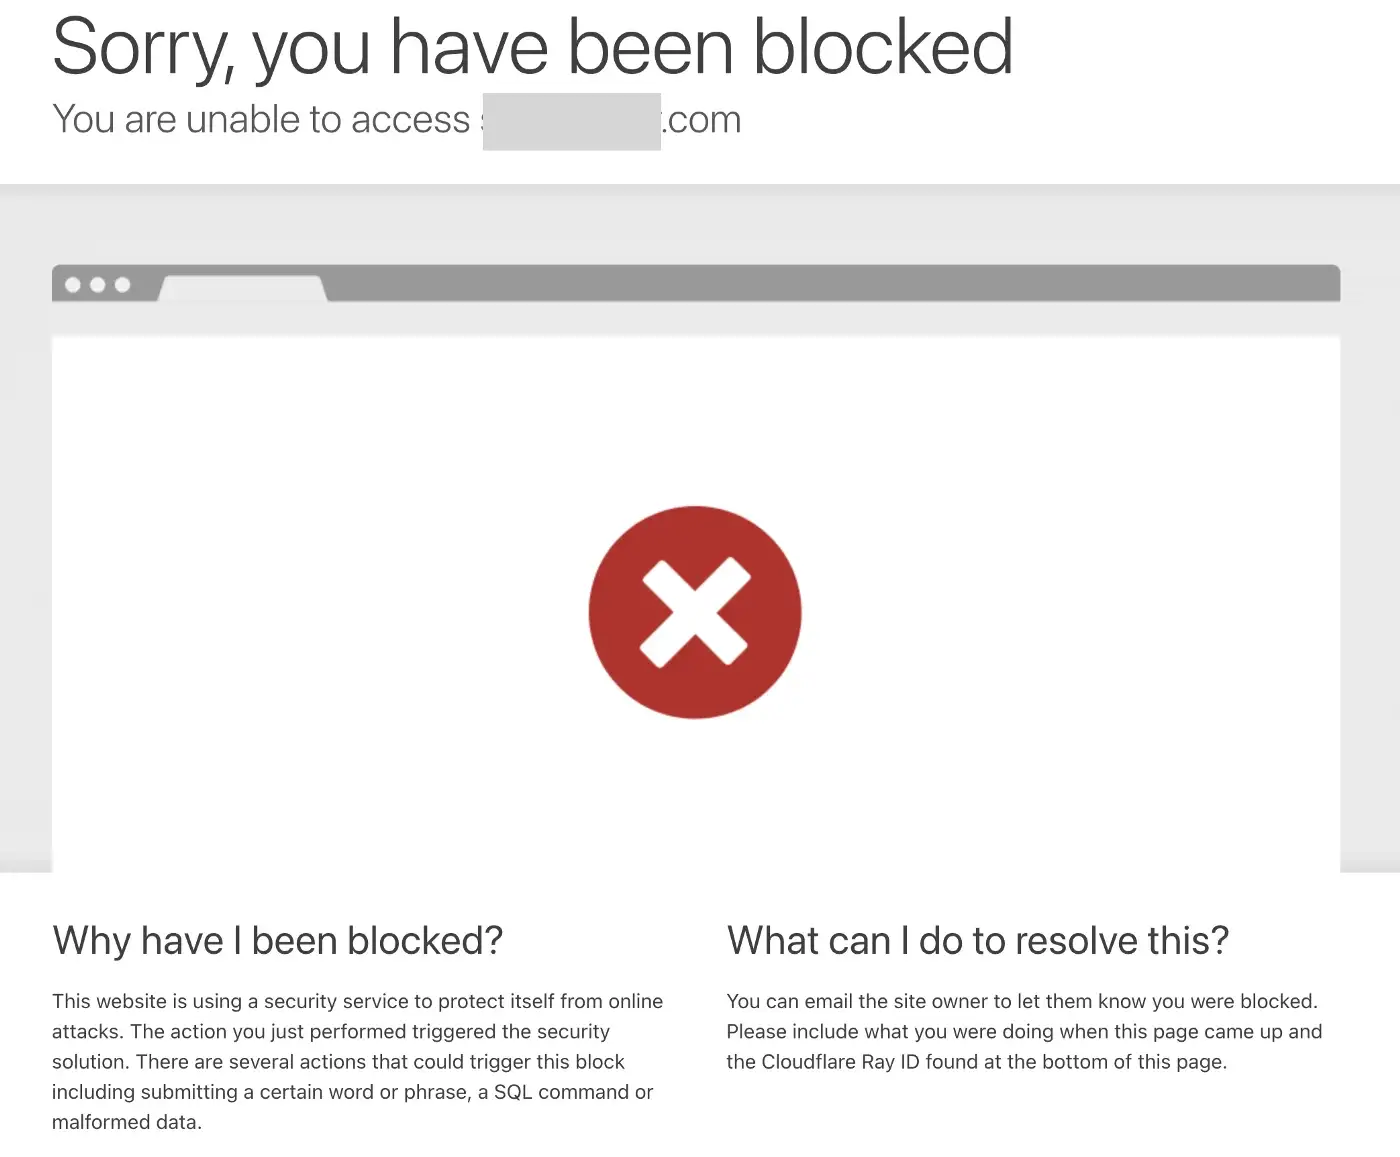 Sorry, you have been blocked screenshot by CloudFlare.